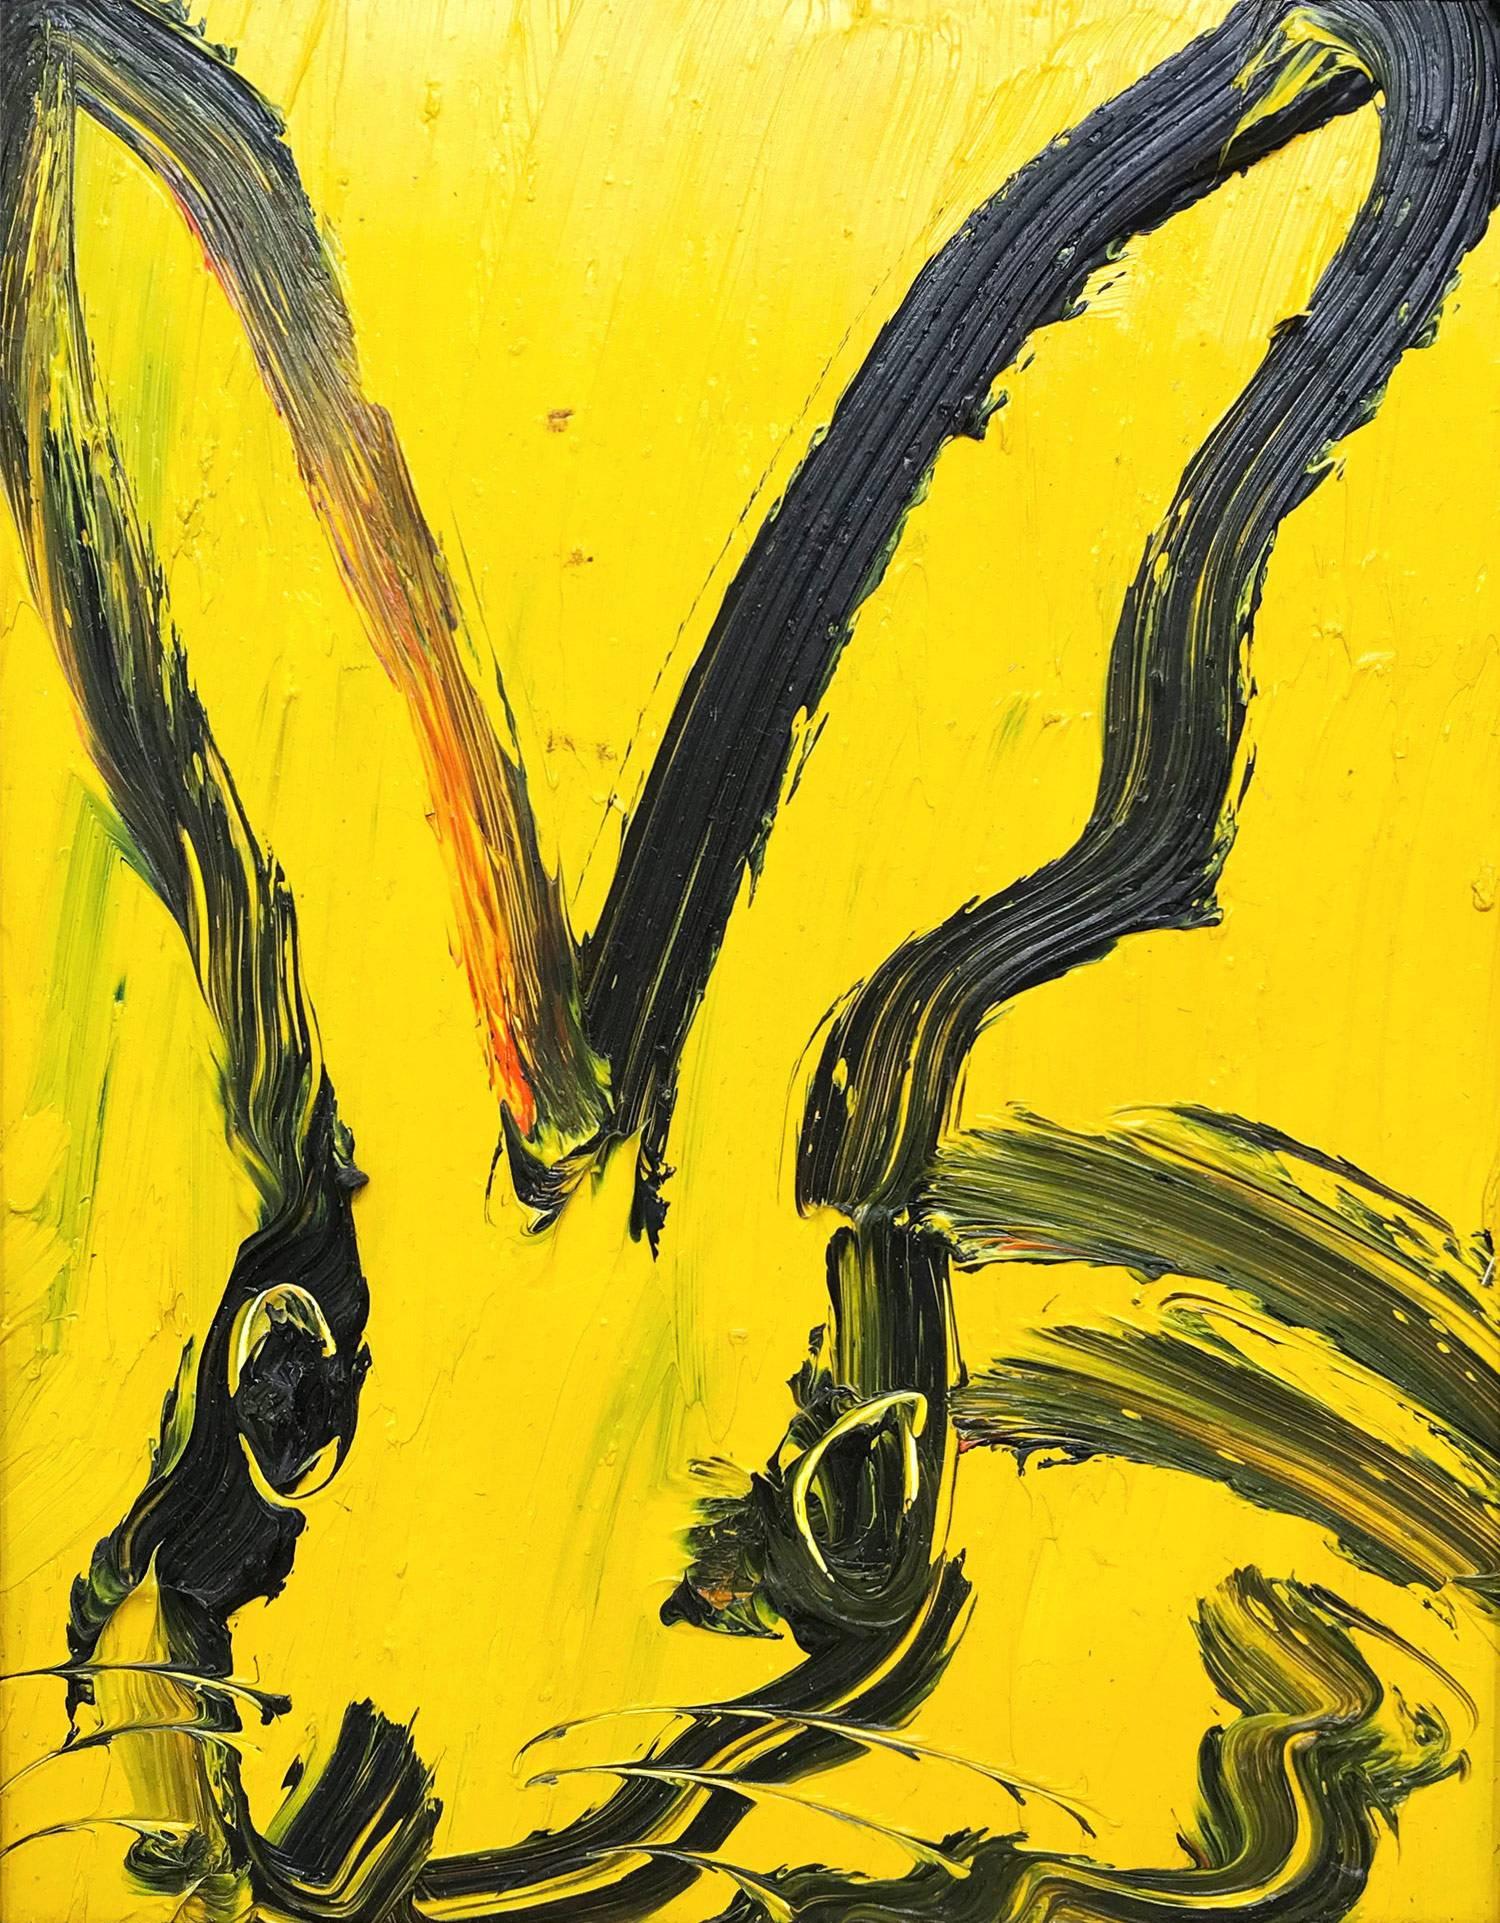 Untitled (Bunny on Yellow) - Painting by Hunt Slonem